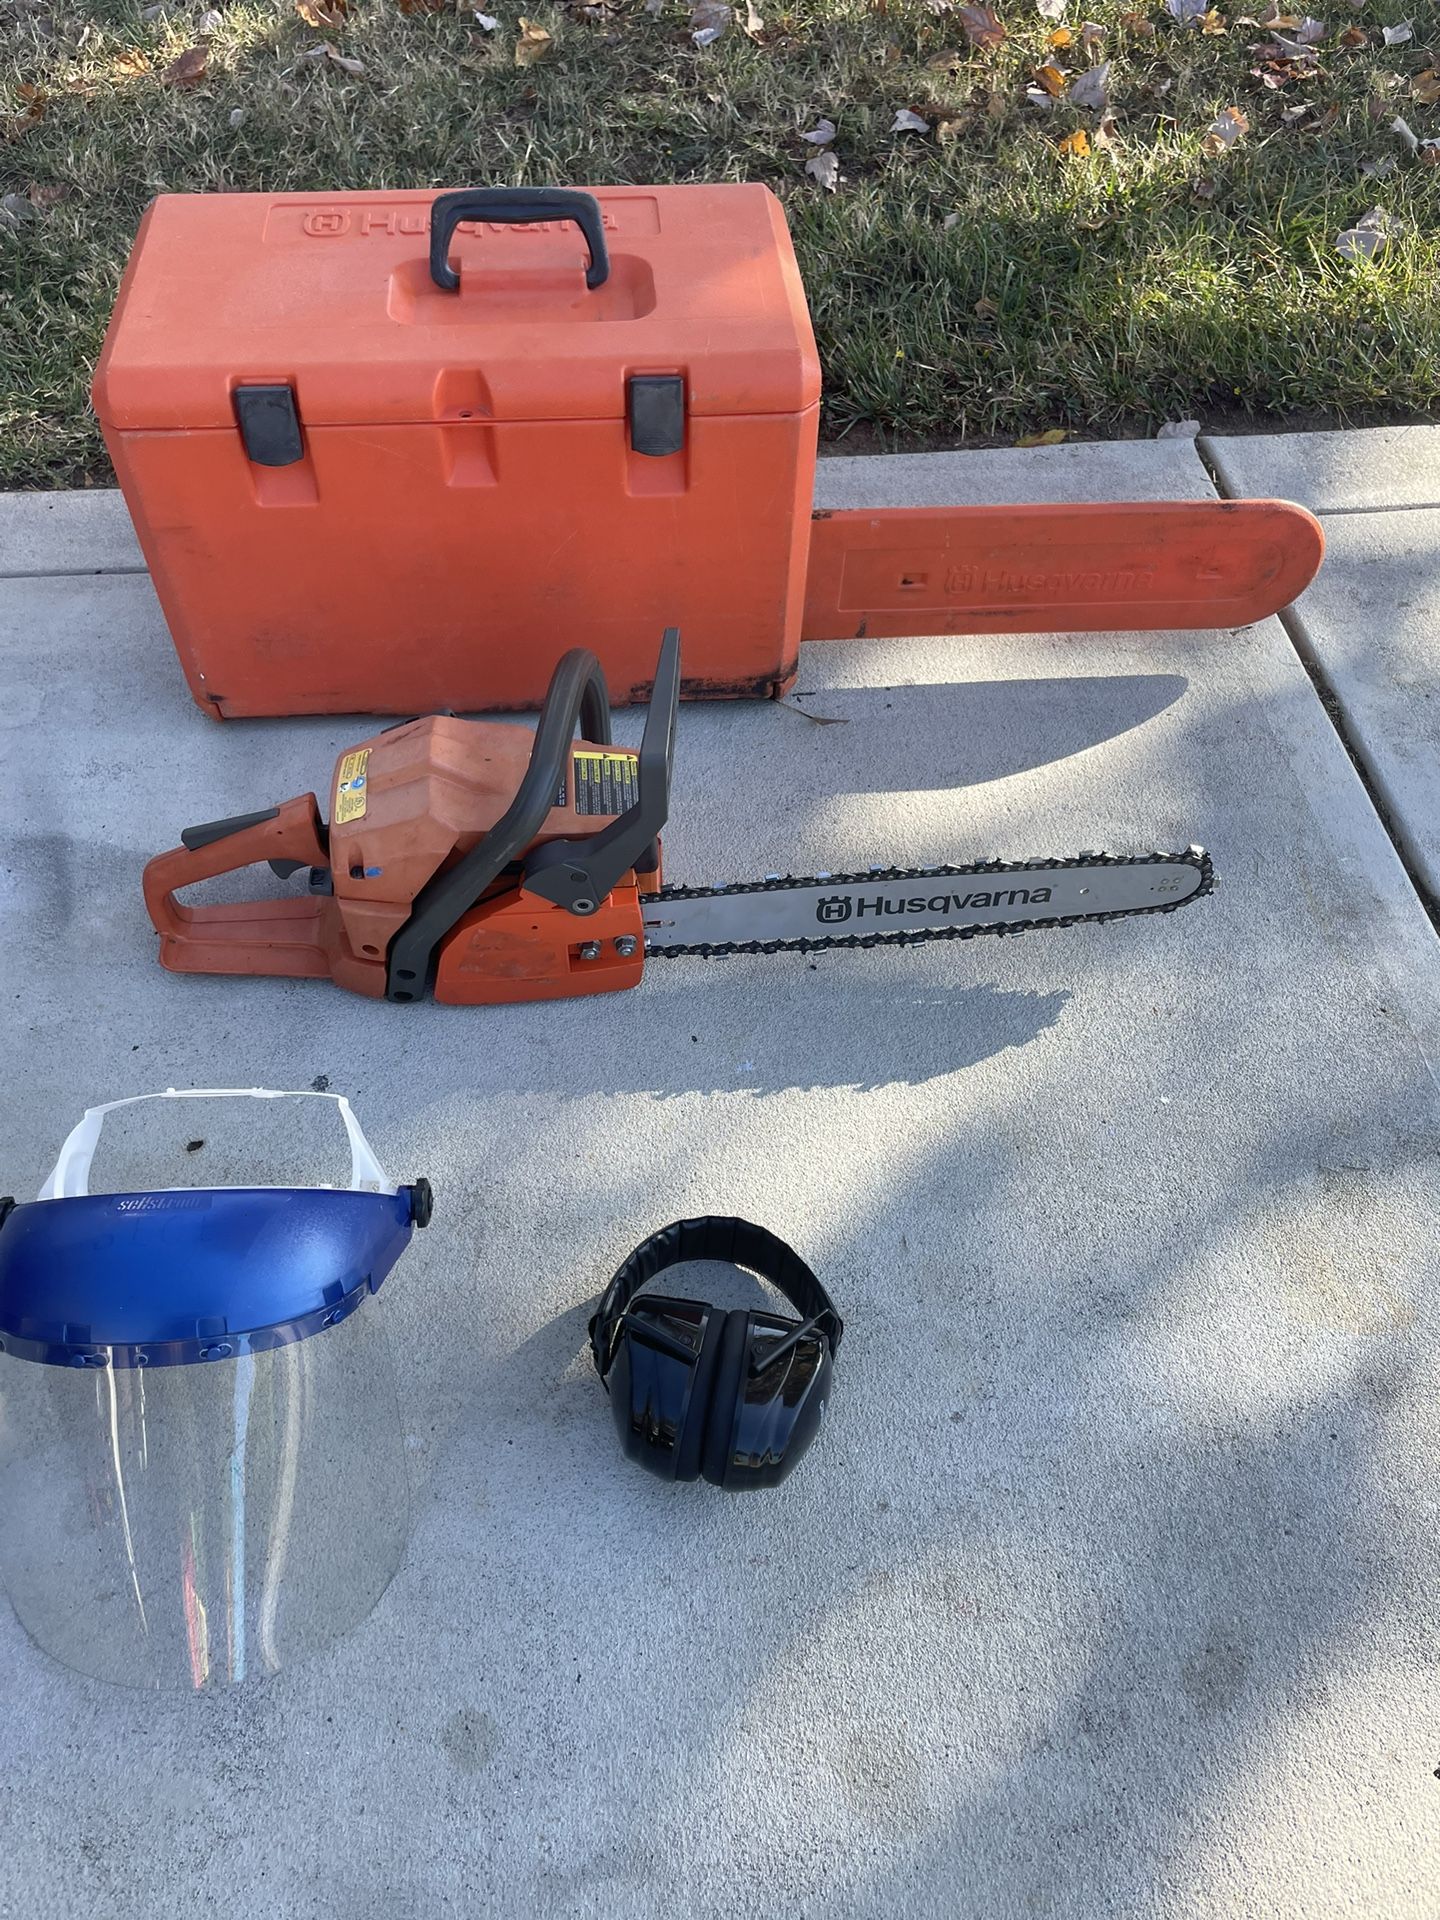 Husqvarna Chainsaw in GOOD working condition PLUS Face Protector and Noise-Canceling Headphones